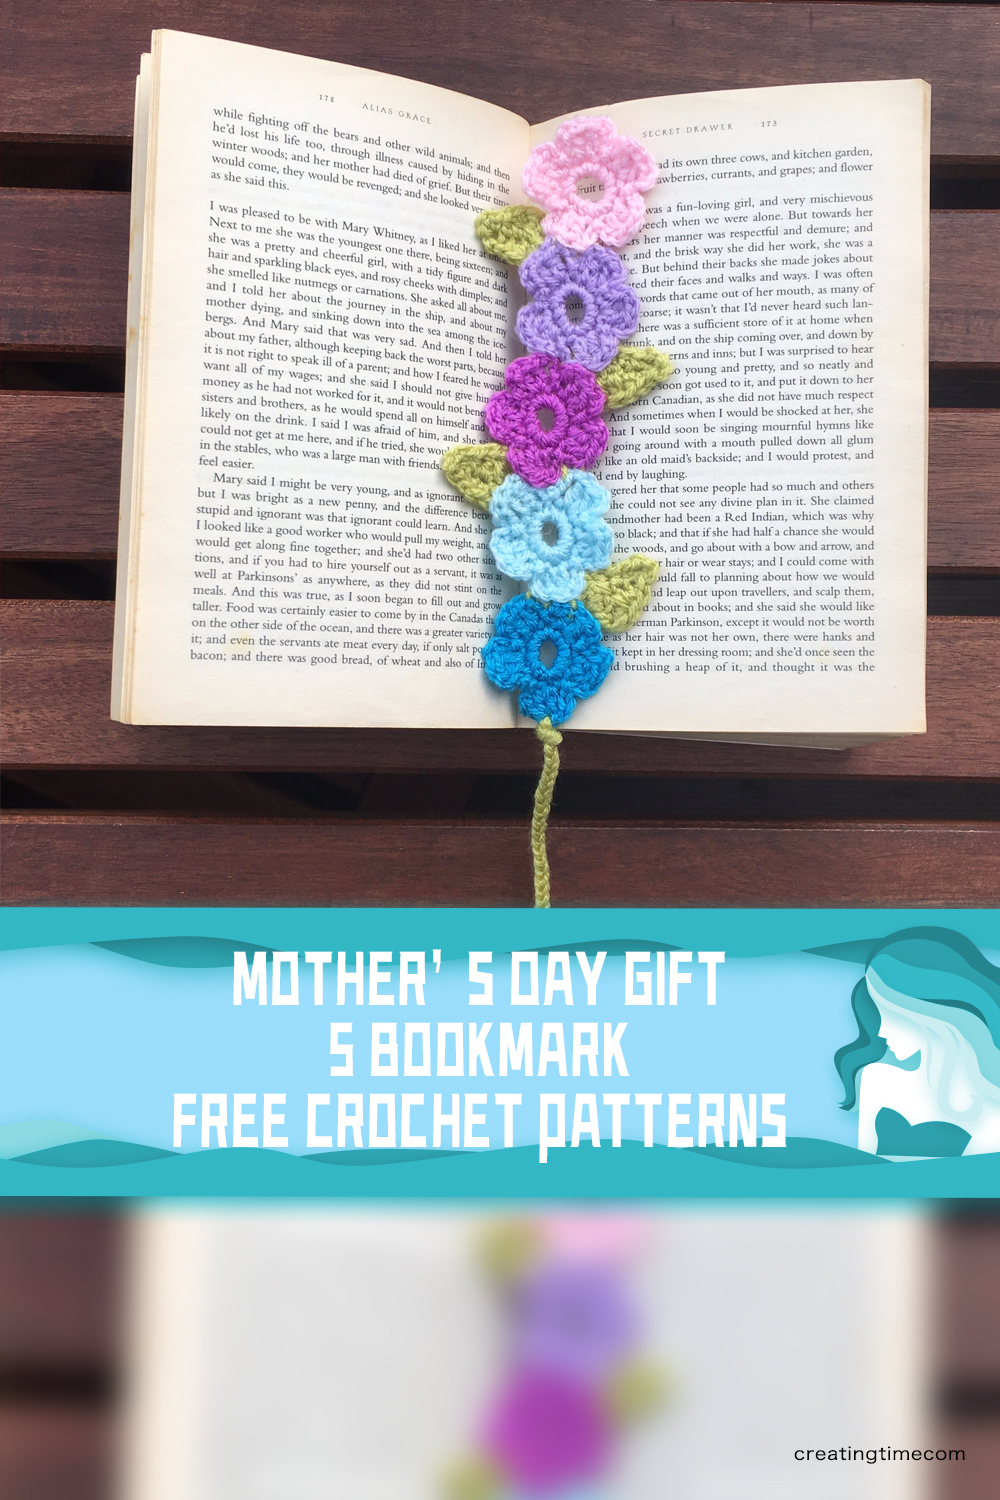 Mother’s Day Gift - 5 Bookmark FREE Crochet Patterns 